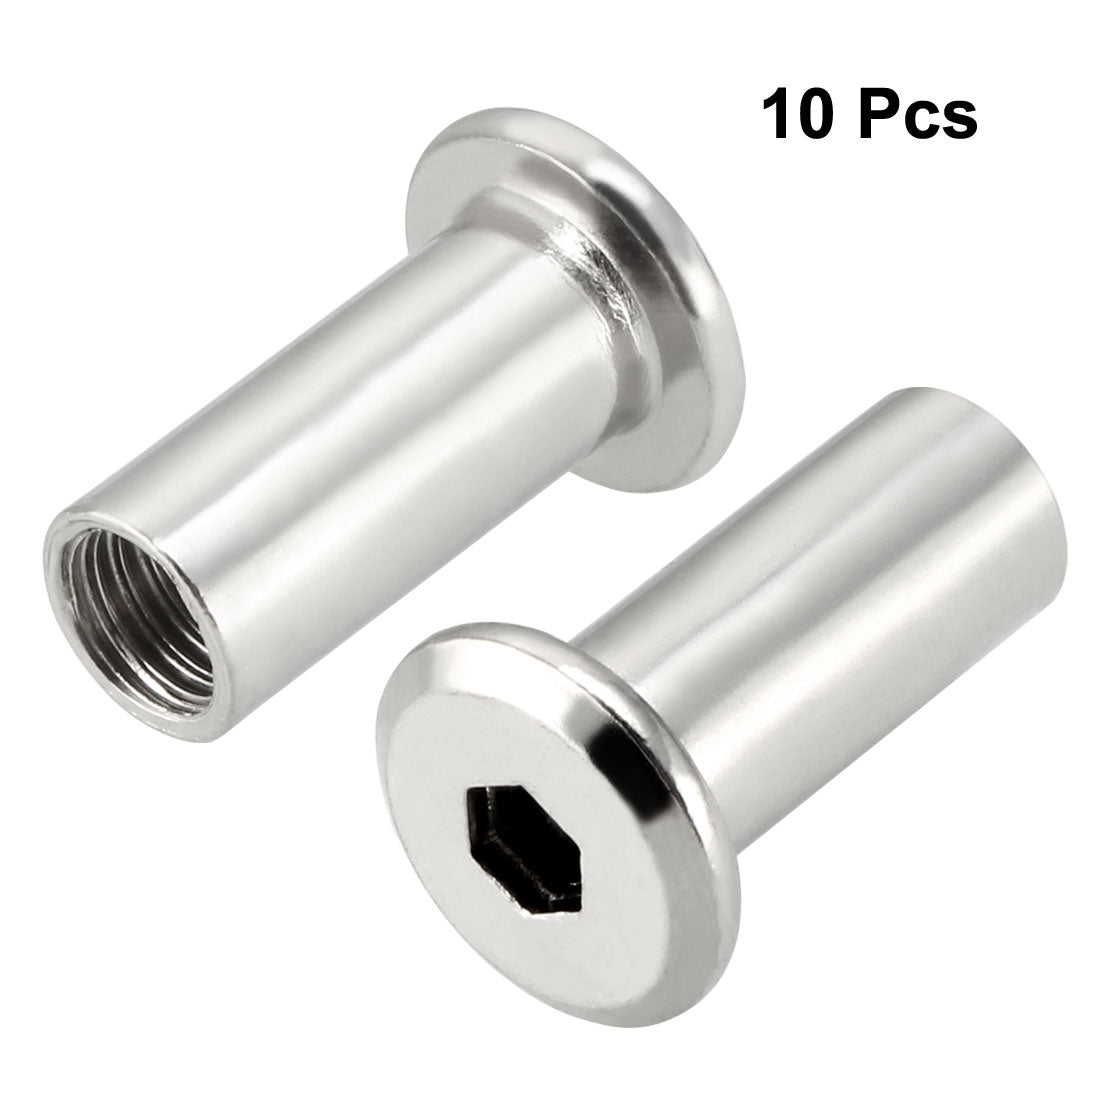 uxcell Uxcell M8x20mm Hex Socket Head Insert Nut Screw Post Sleeve Nut for Furniture 10pcs